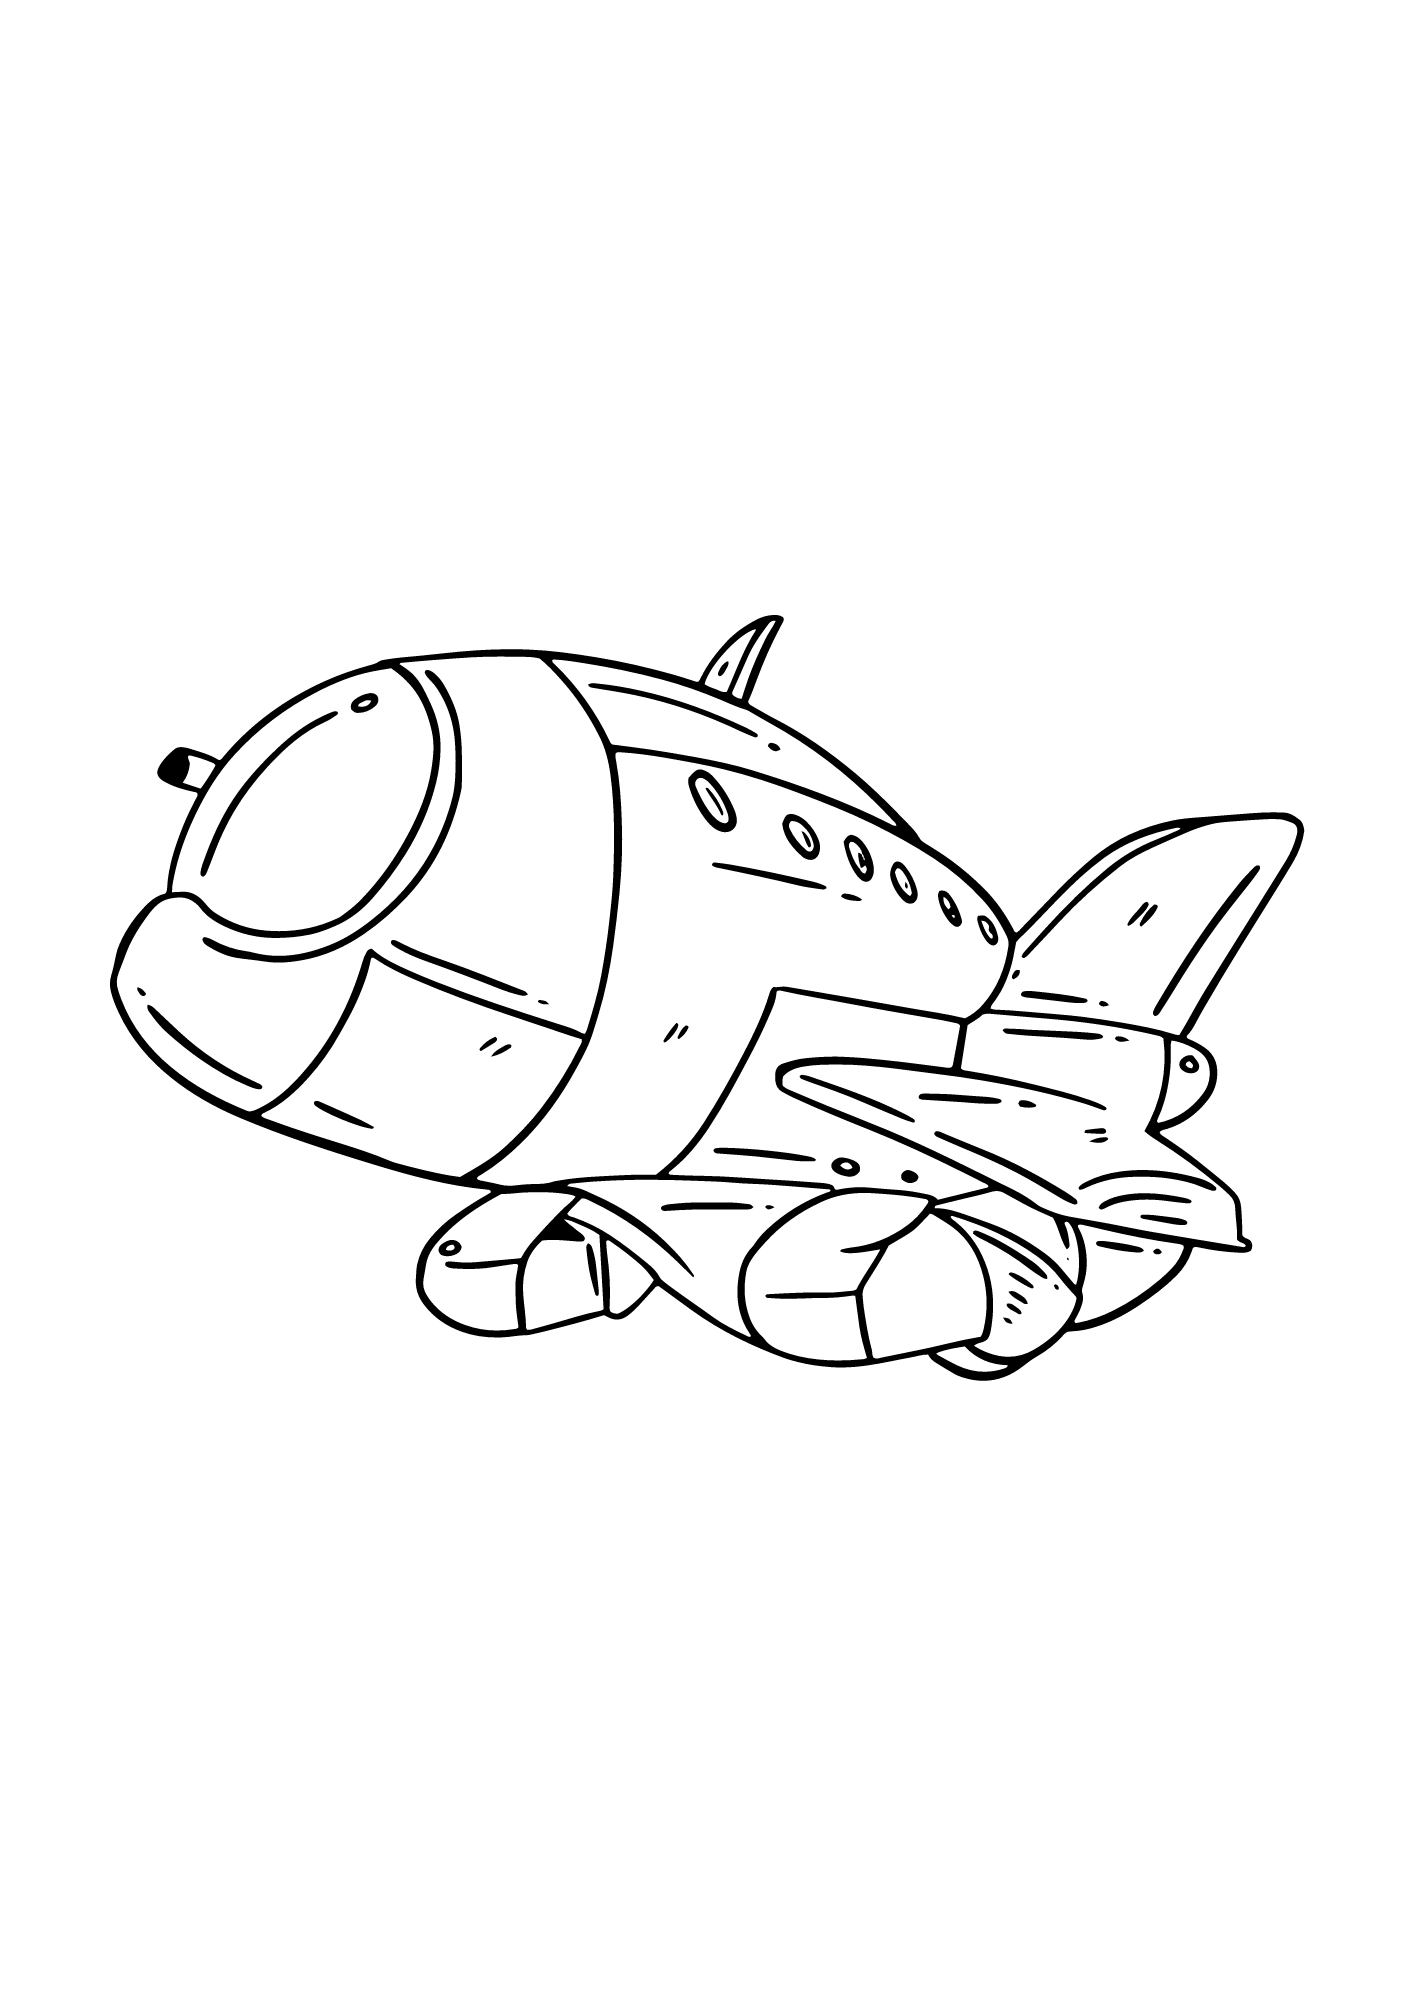 Helicopter Free Printable Coloring Pages